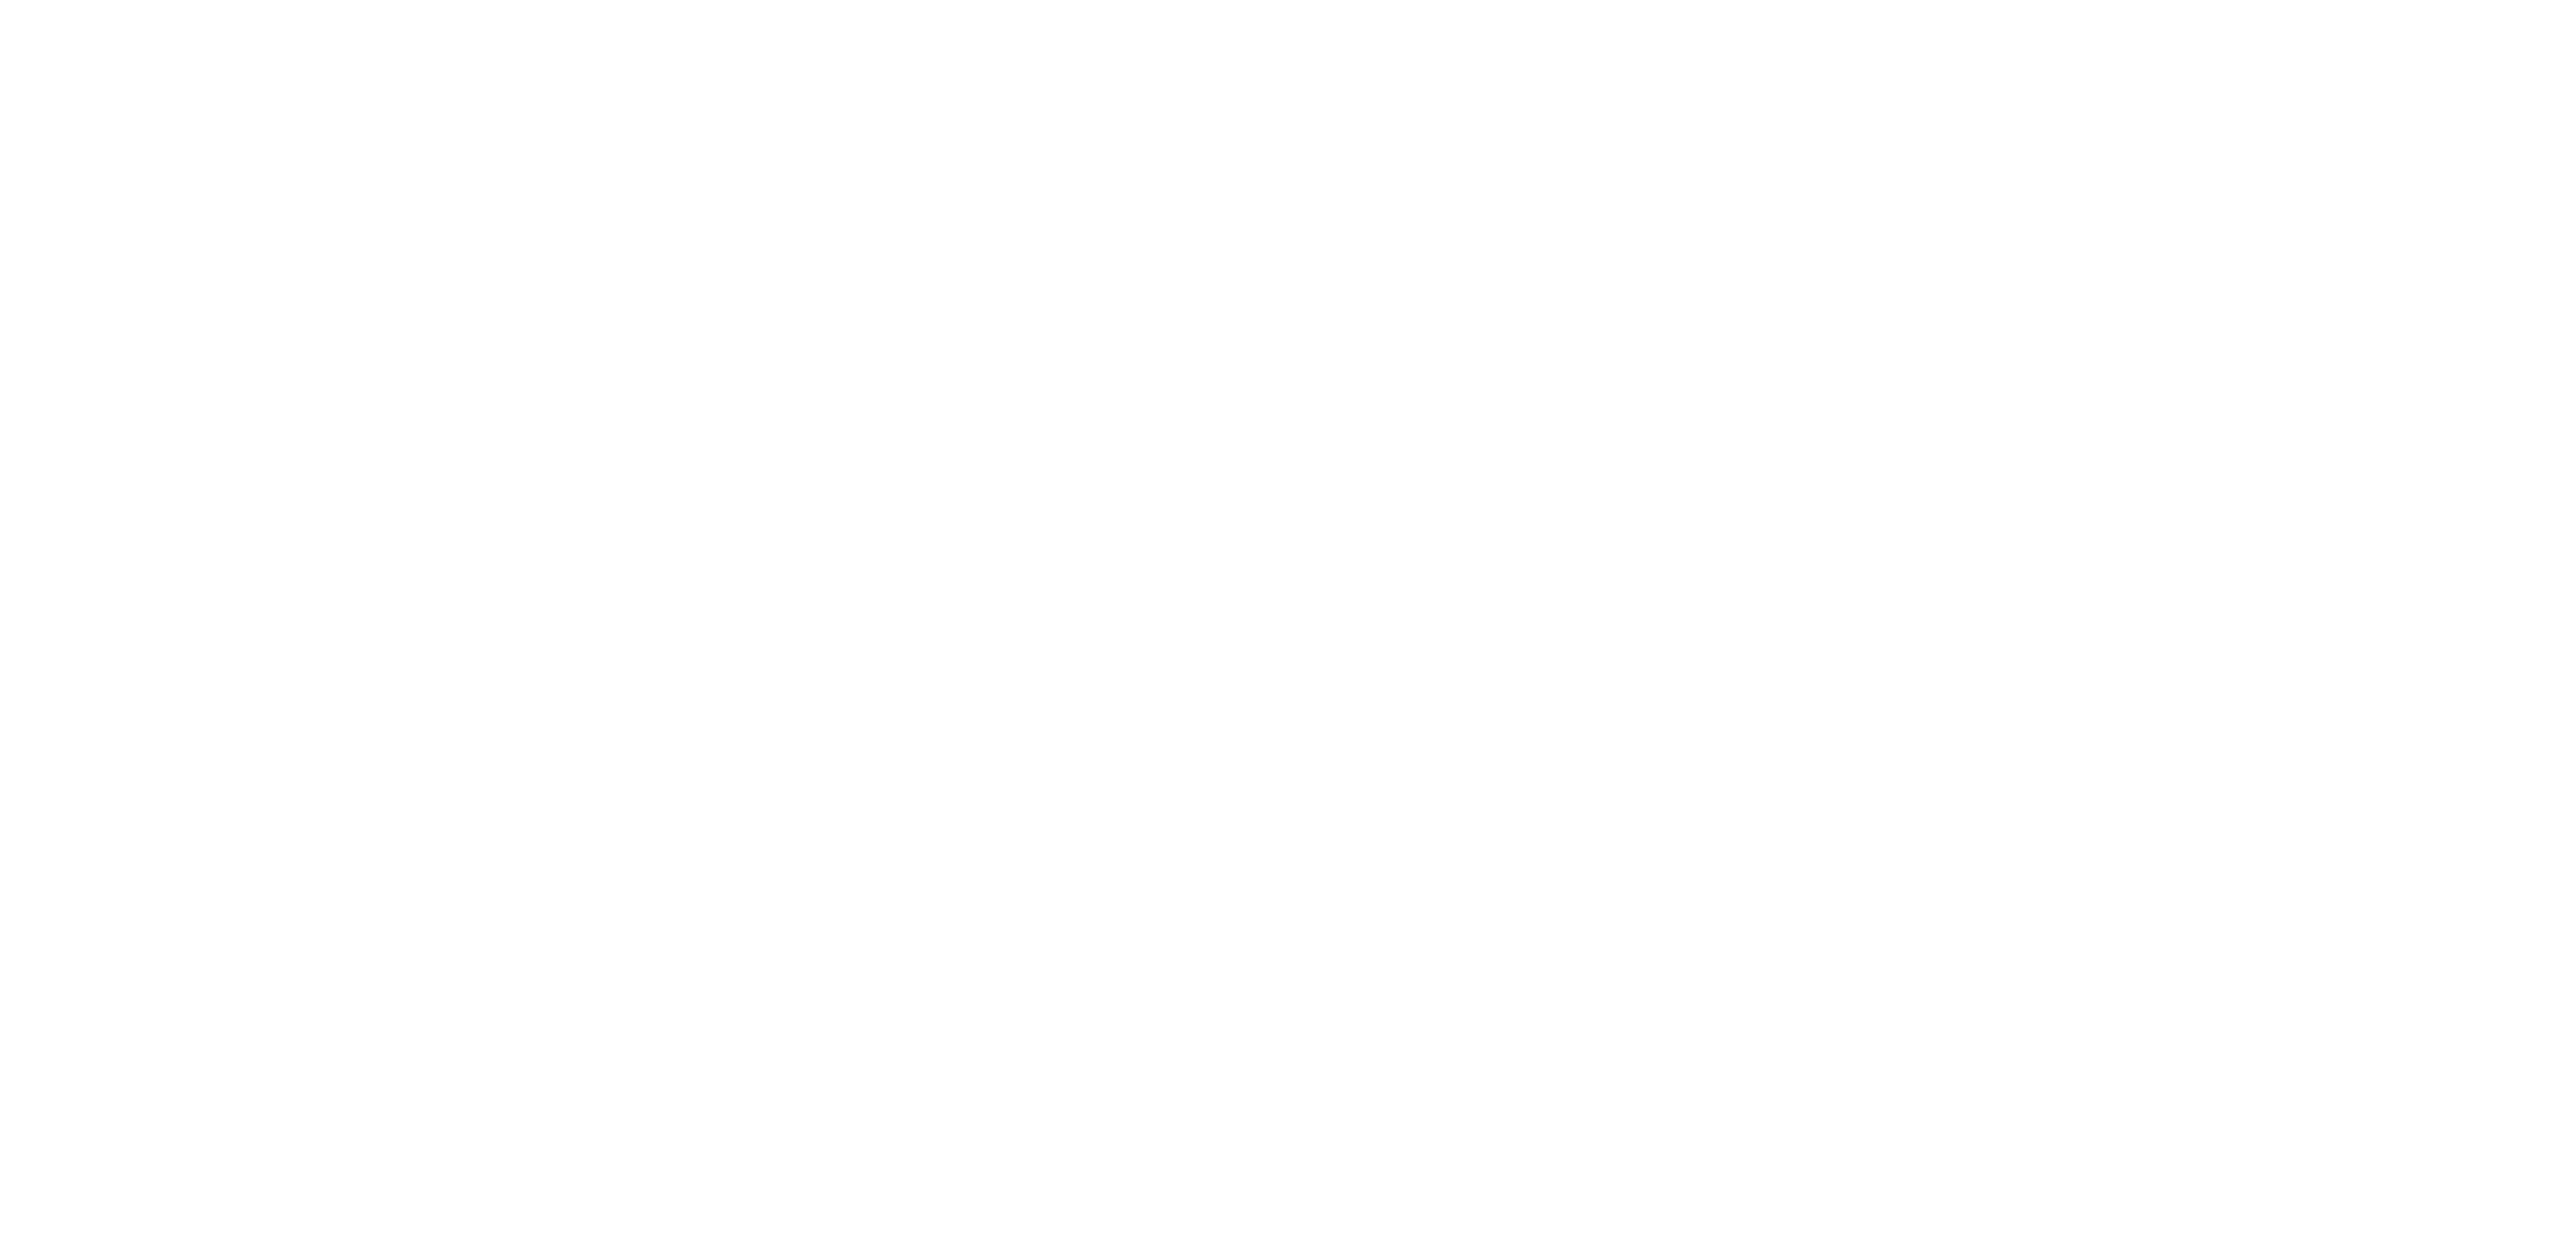 Pathway to Care and Recovery